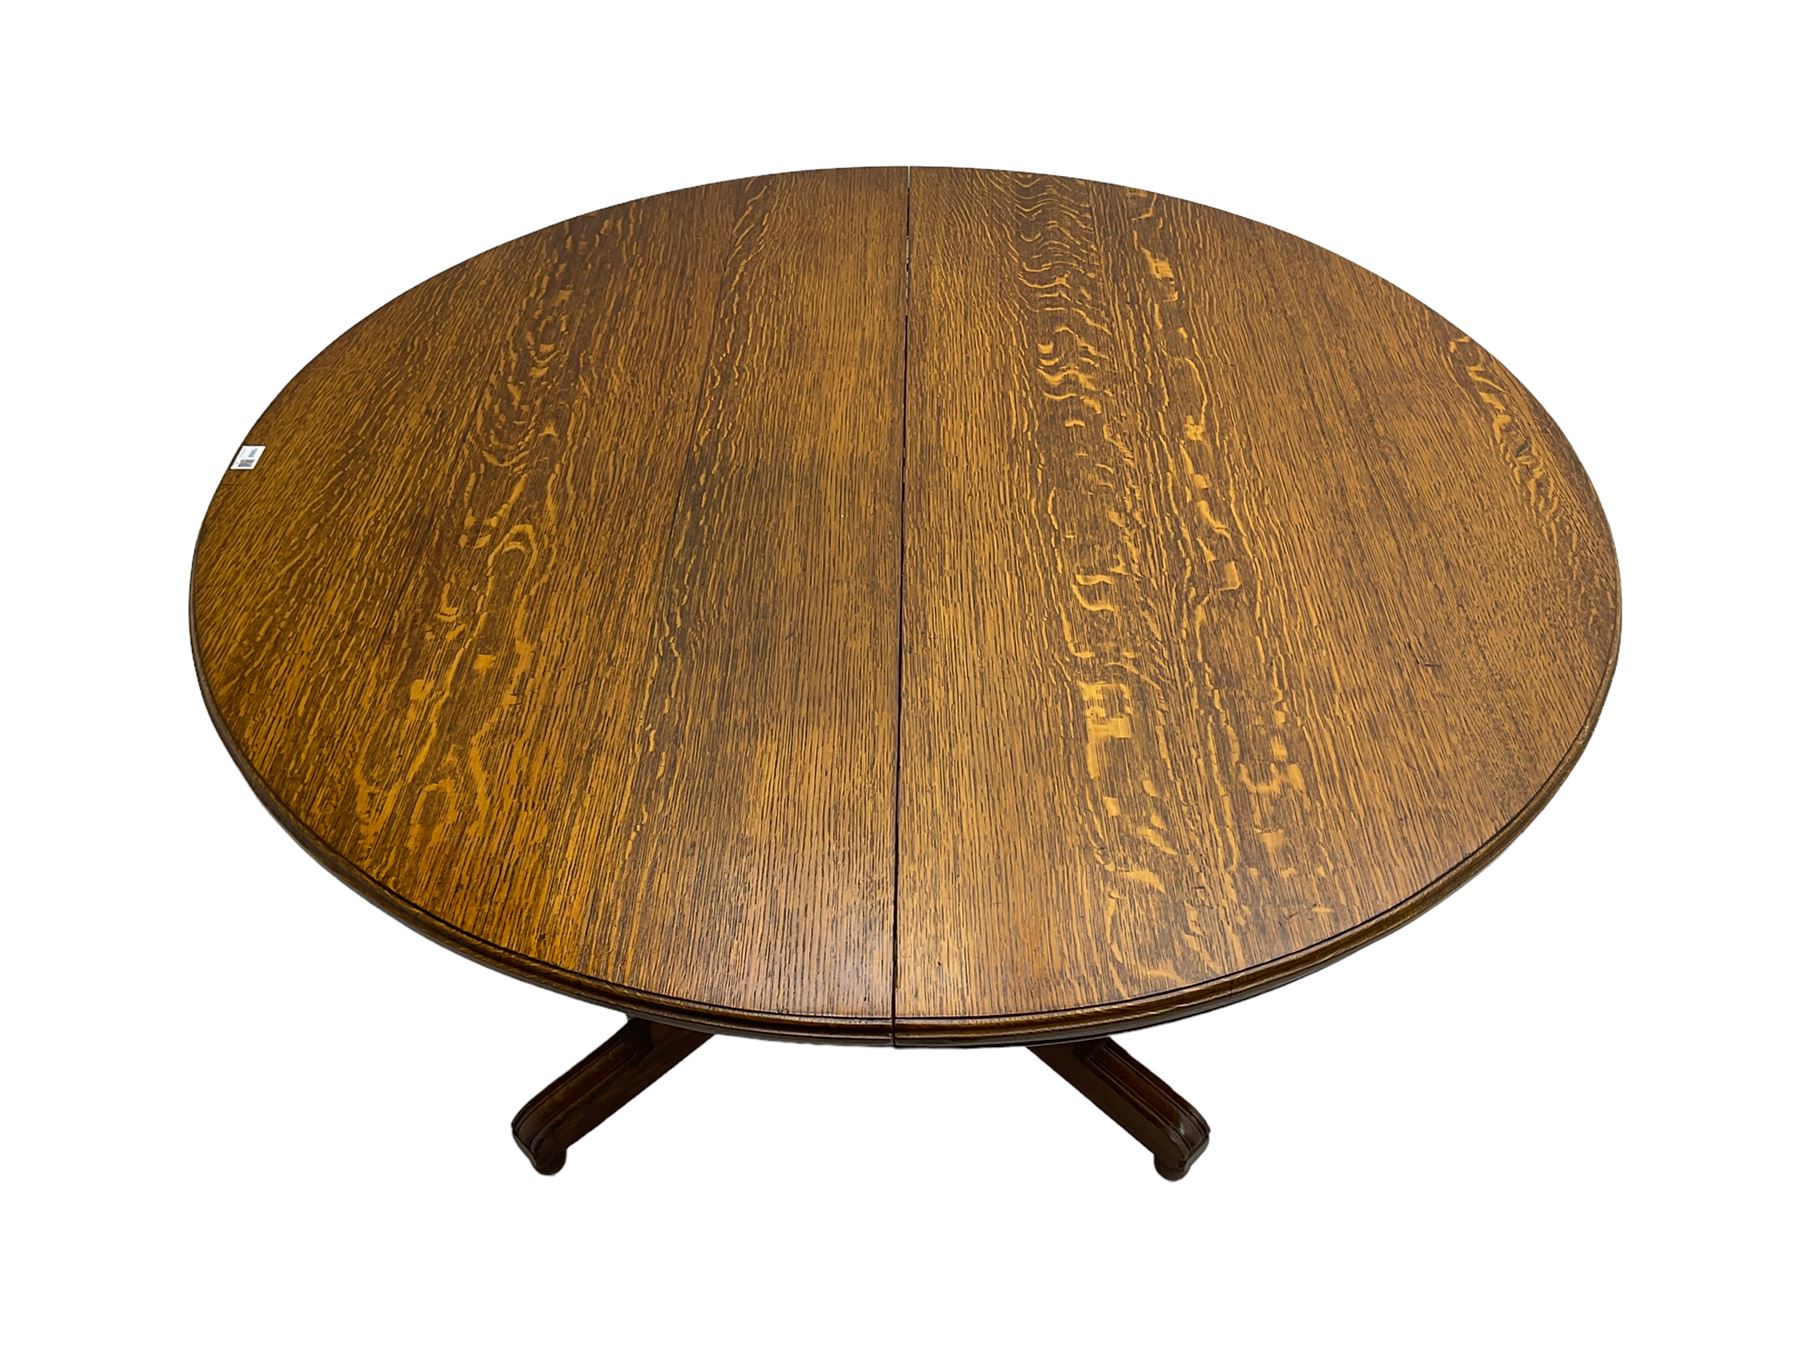 Early 20th century oak dining table - Image 7 of 8